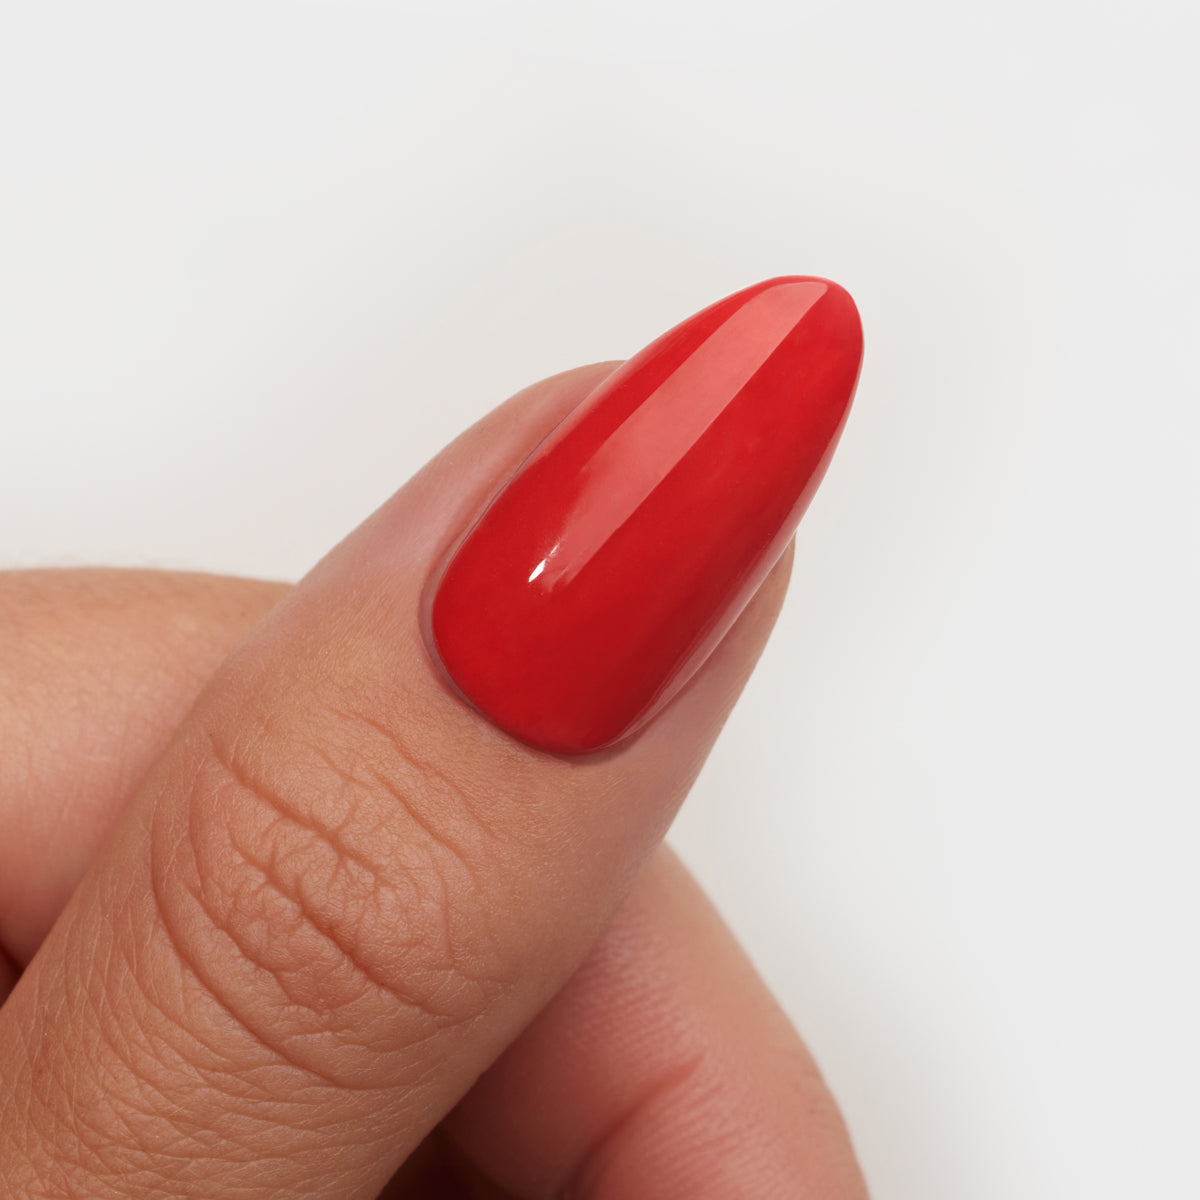 Gelous Red Sass gel nail polish swatch - photographed in New Zealand